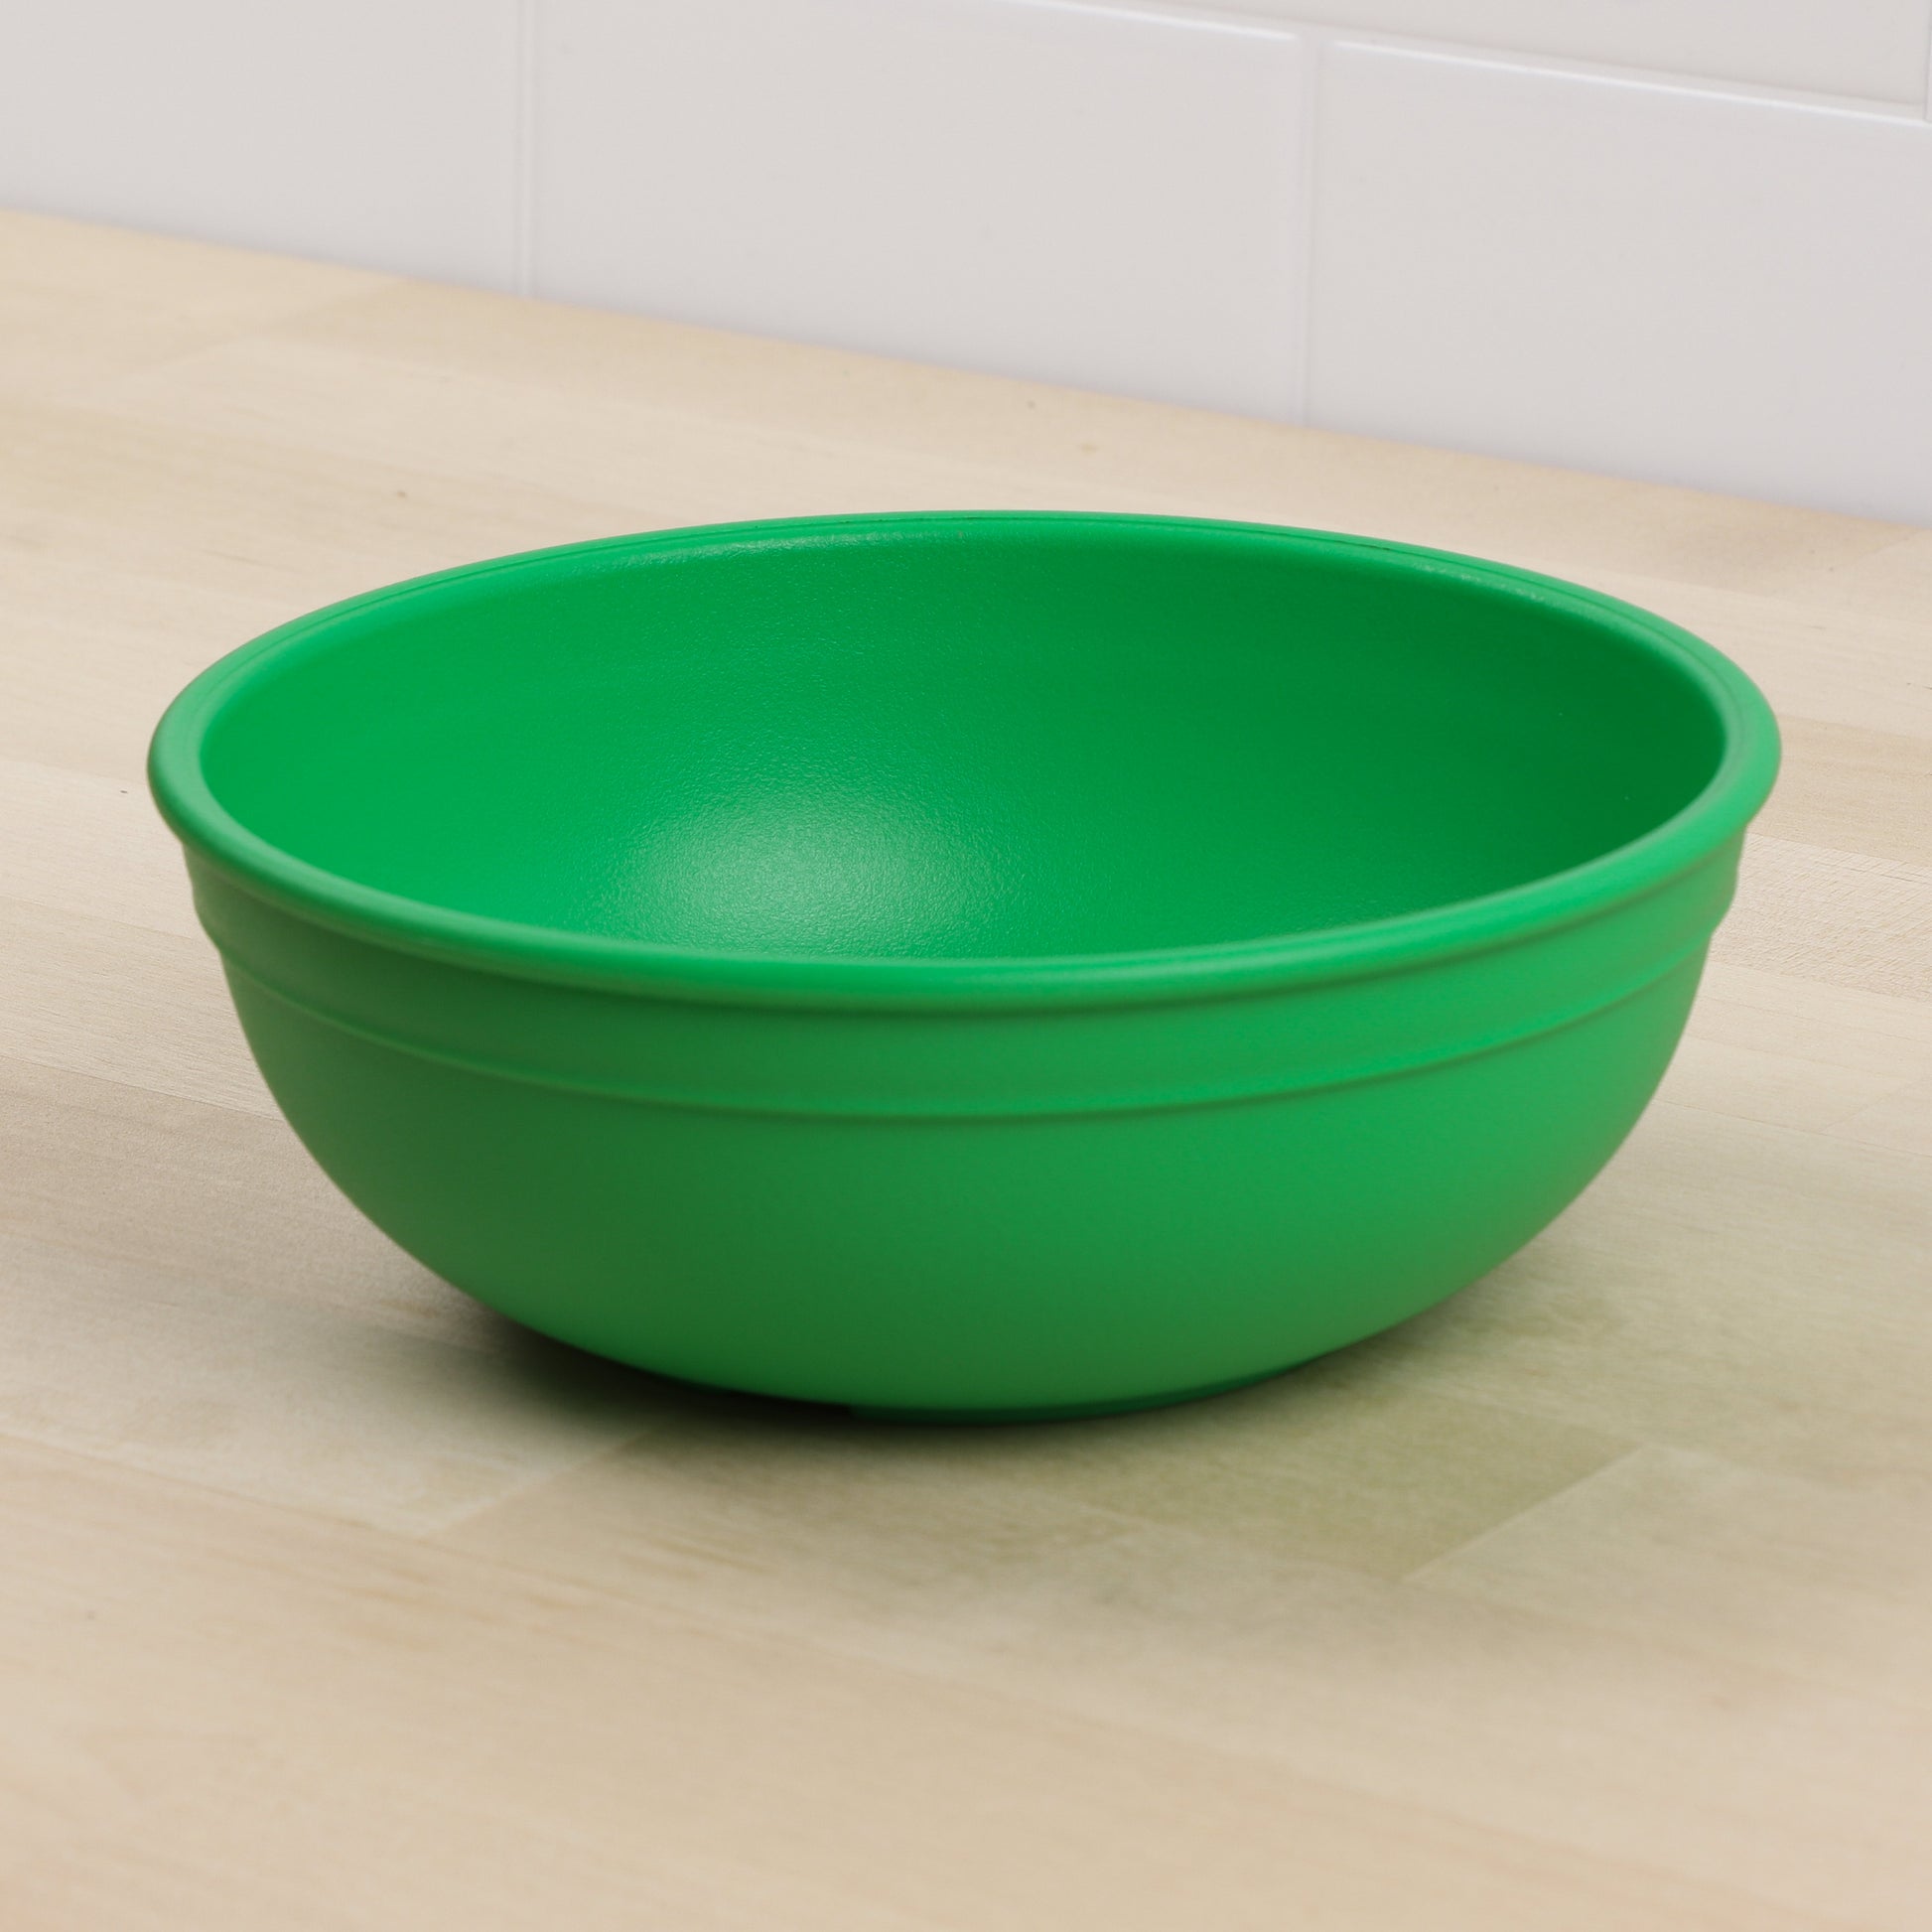 Re-Play Bowl | Kelly Large Size from Bear & Moo